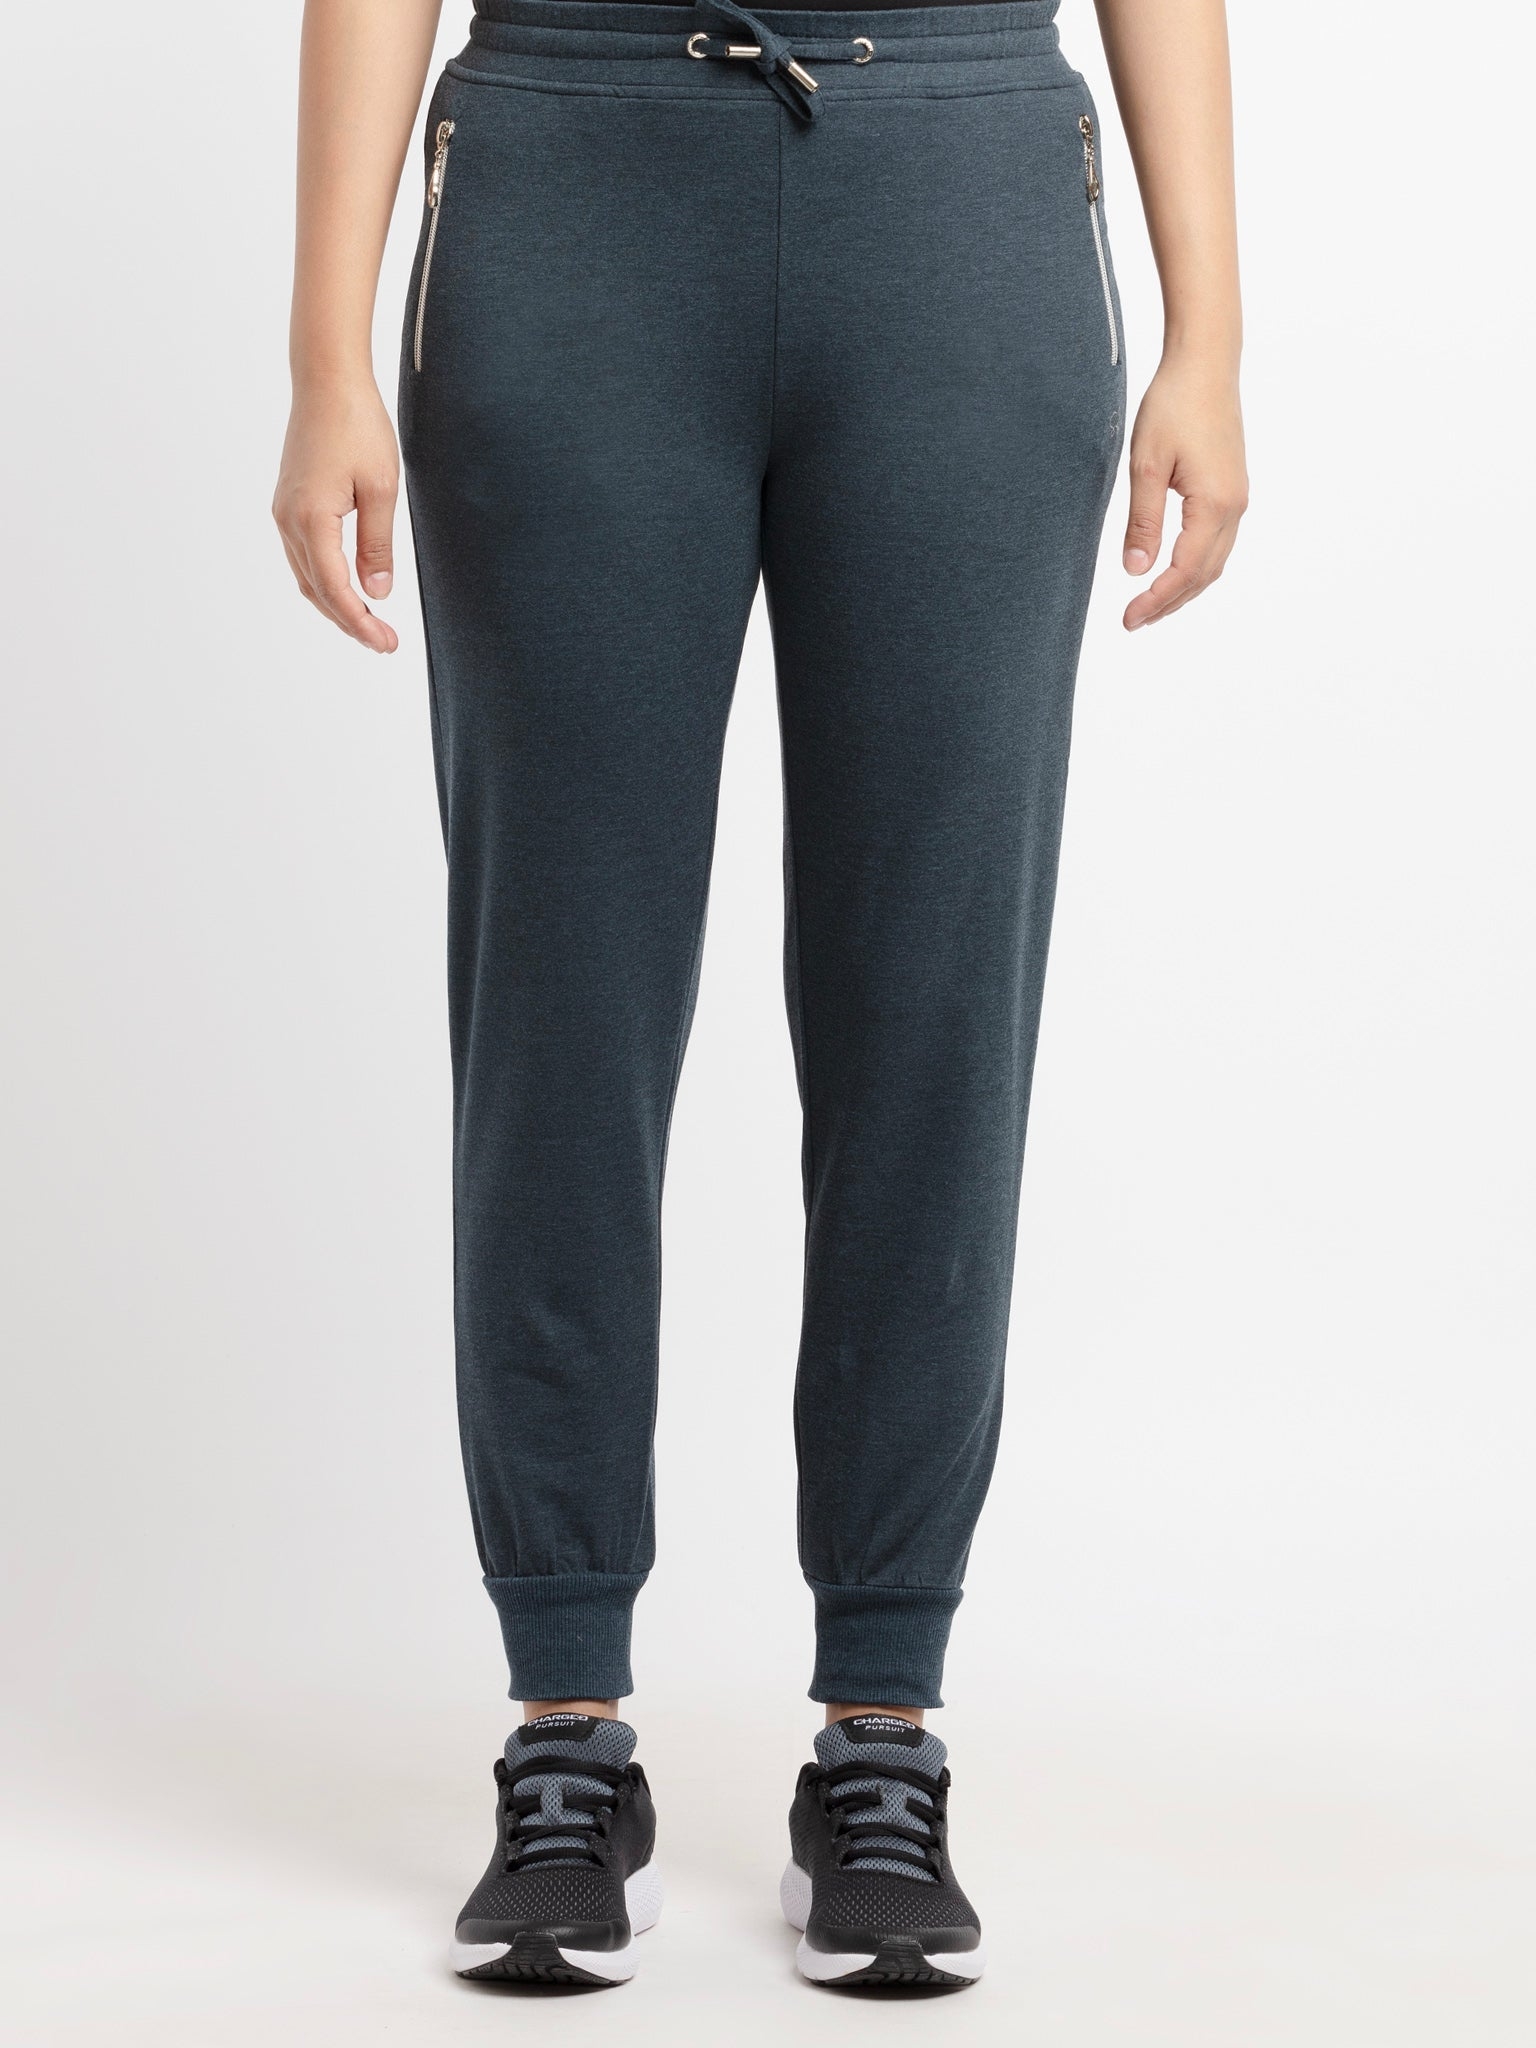 Status Quo | Women'ss Full length Solid Joggers